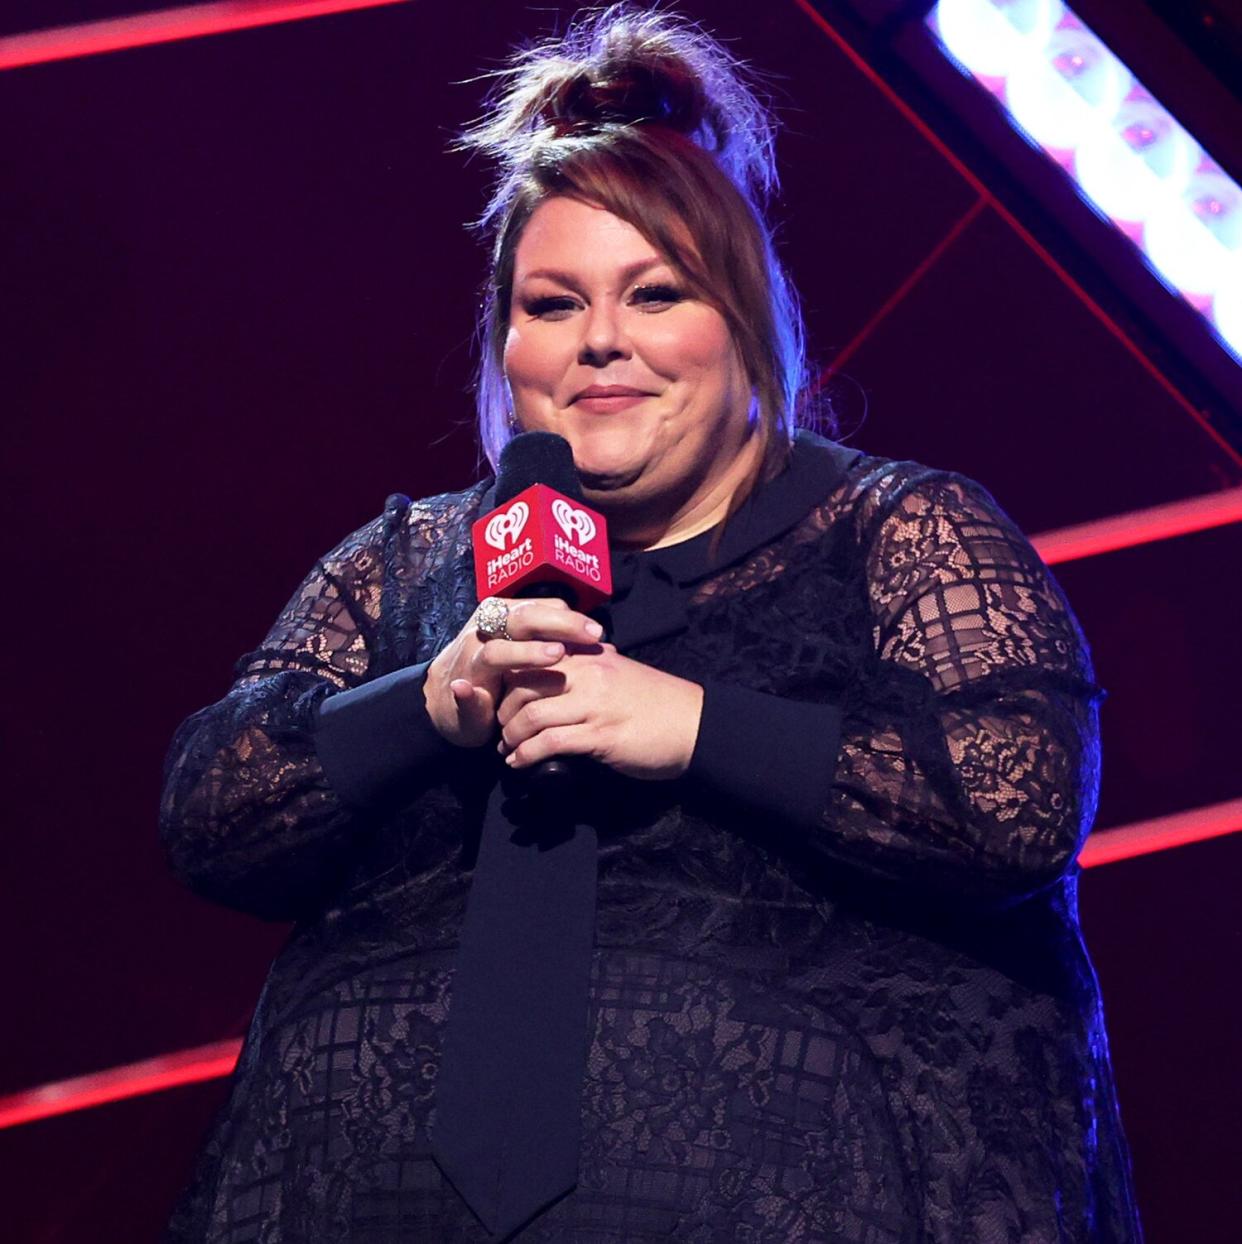 Chrissy Metz speak onstage during the 2021 iHeartRadio Music Festival on September 17, 2021 at T-Mobile Arena in Las Vegas, Nevada.